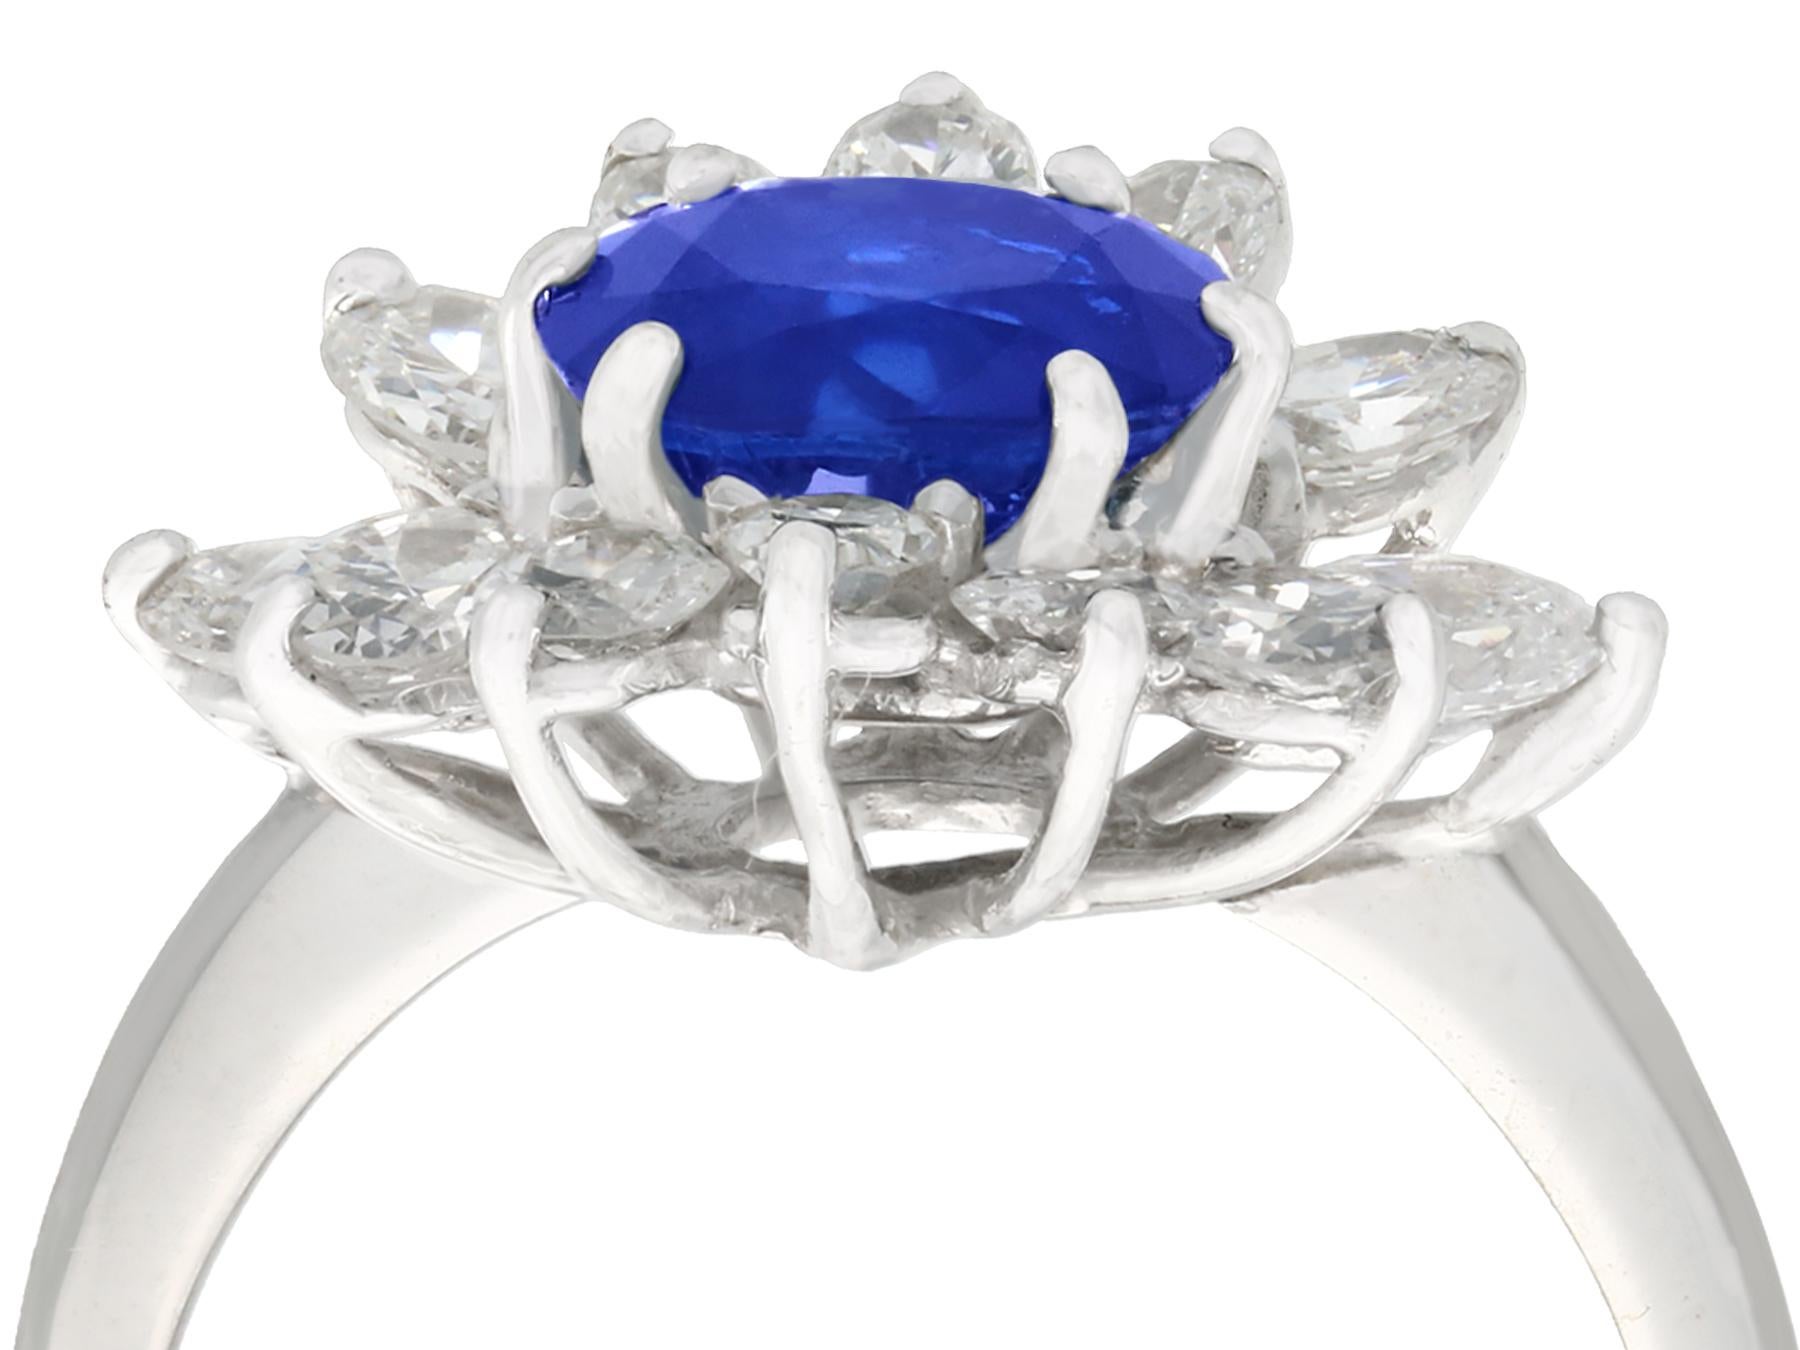 A stunning, fine and impressive vintage 1.85 carat natural blue sapphire and 1.56 carat diamond, 18 karat white gold dress ring: part our jewelry and estate jewelry collection.

This stunning vintage French sapphire ring has been crafted in 18k